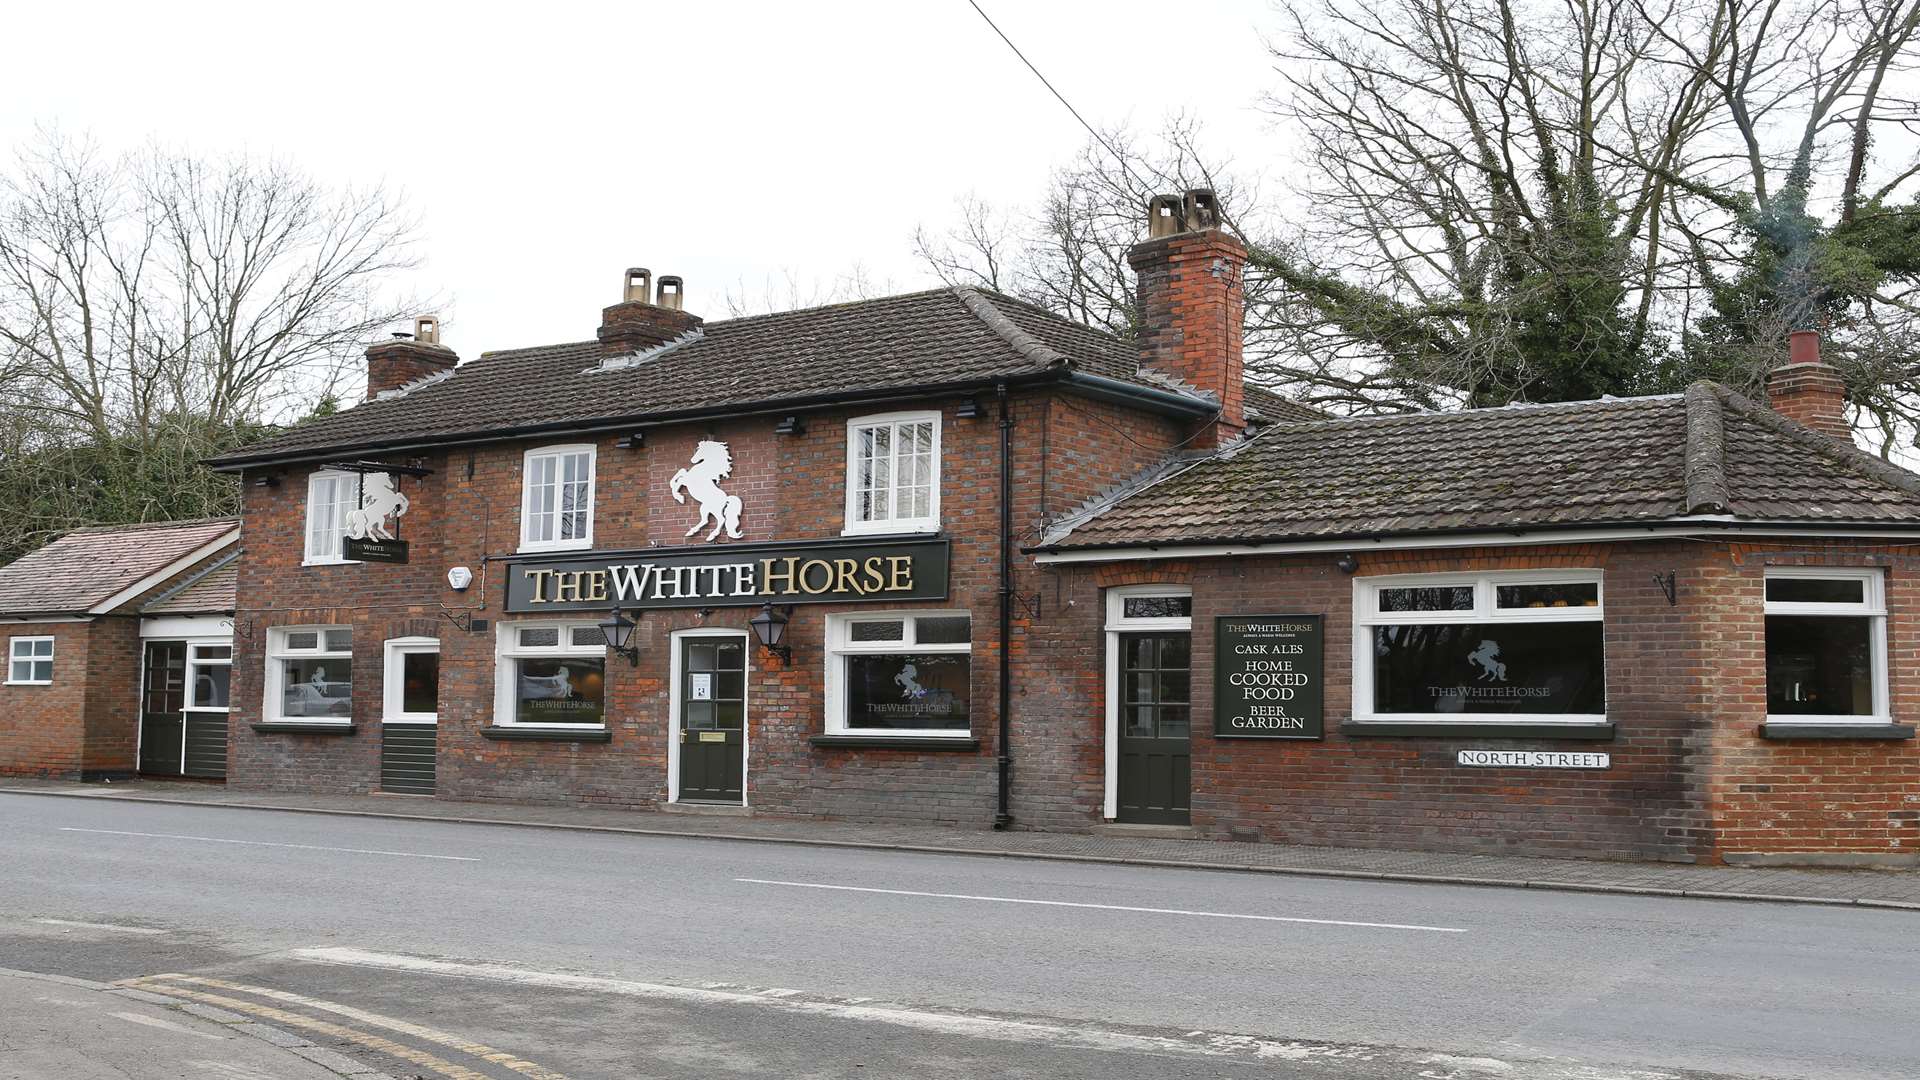 The White Horse Pub has reopened after a refurbishment